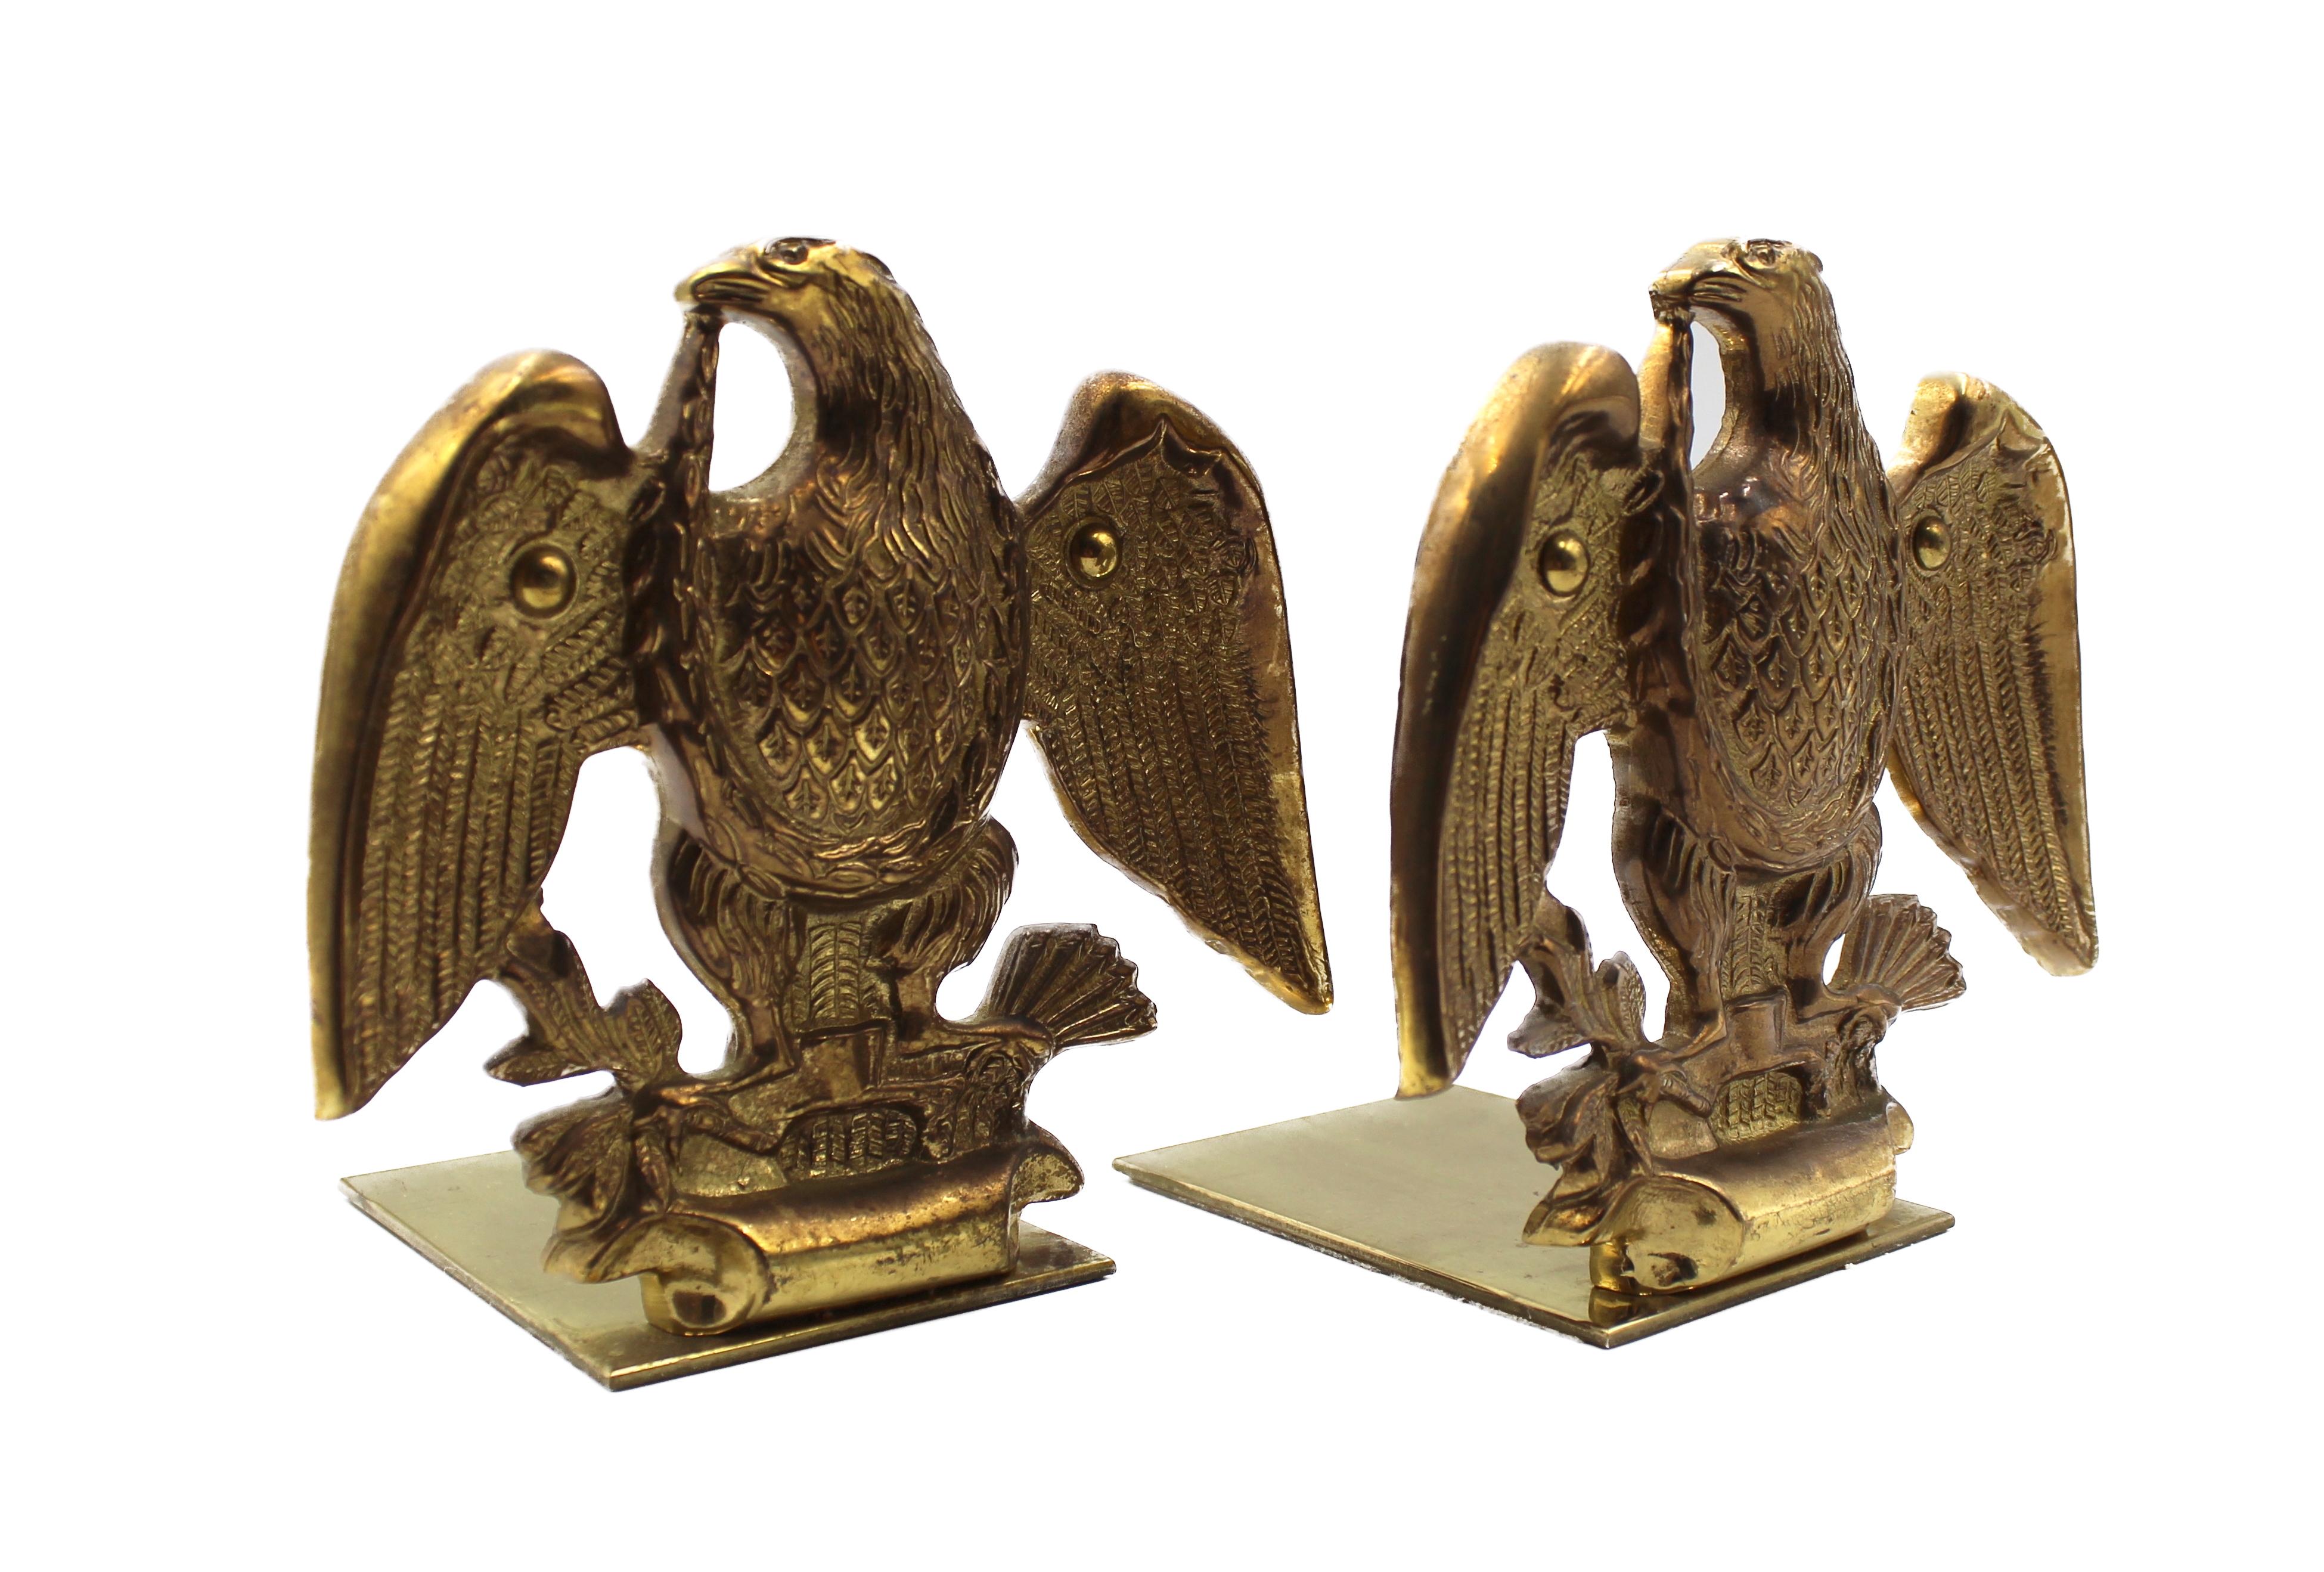 Vintage American Eagle Bookends by Baldwin Brass 2